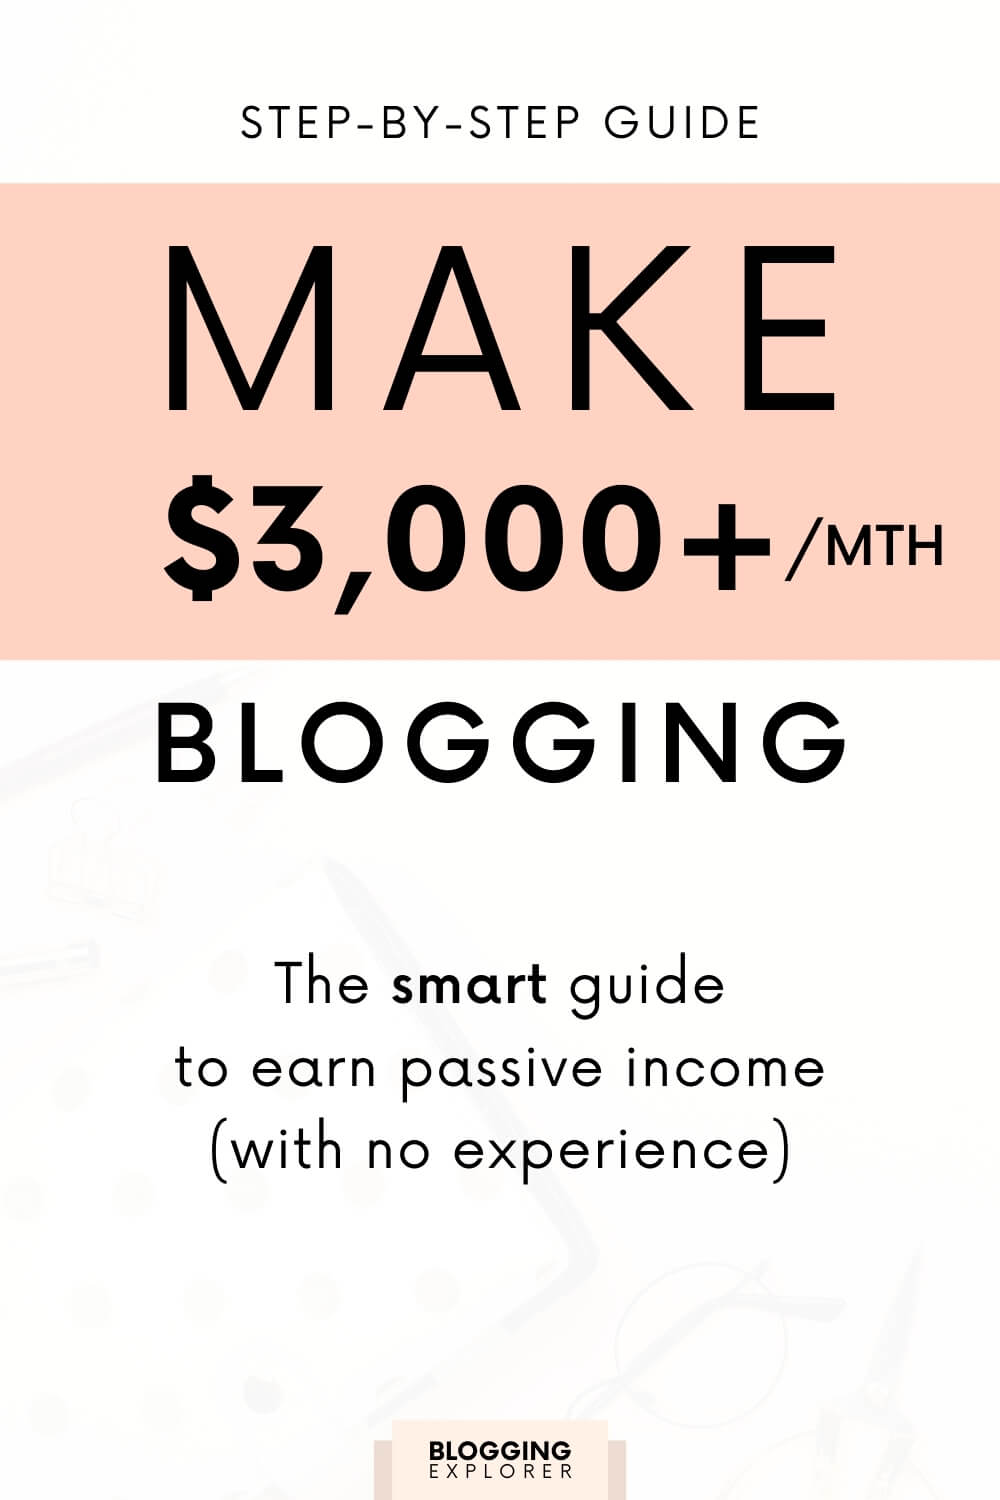 How to Make Money Blogging for Beginners (2021): Step-by-Step Guide